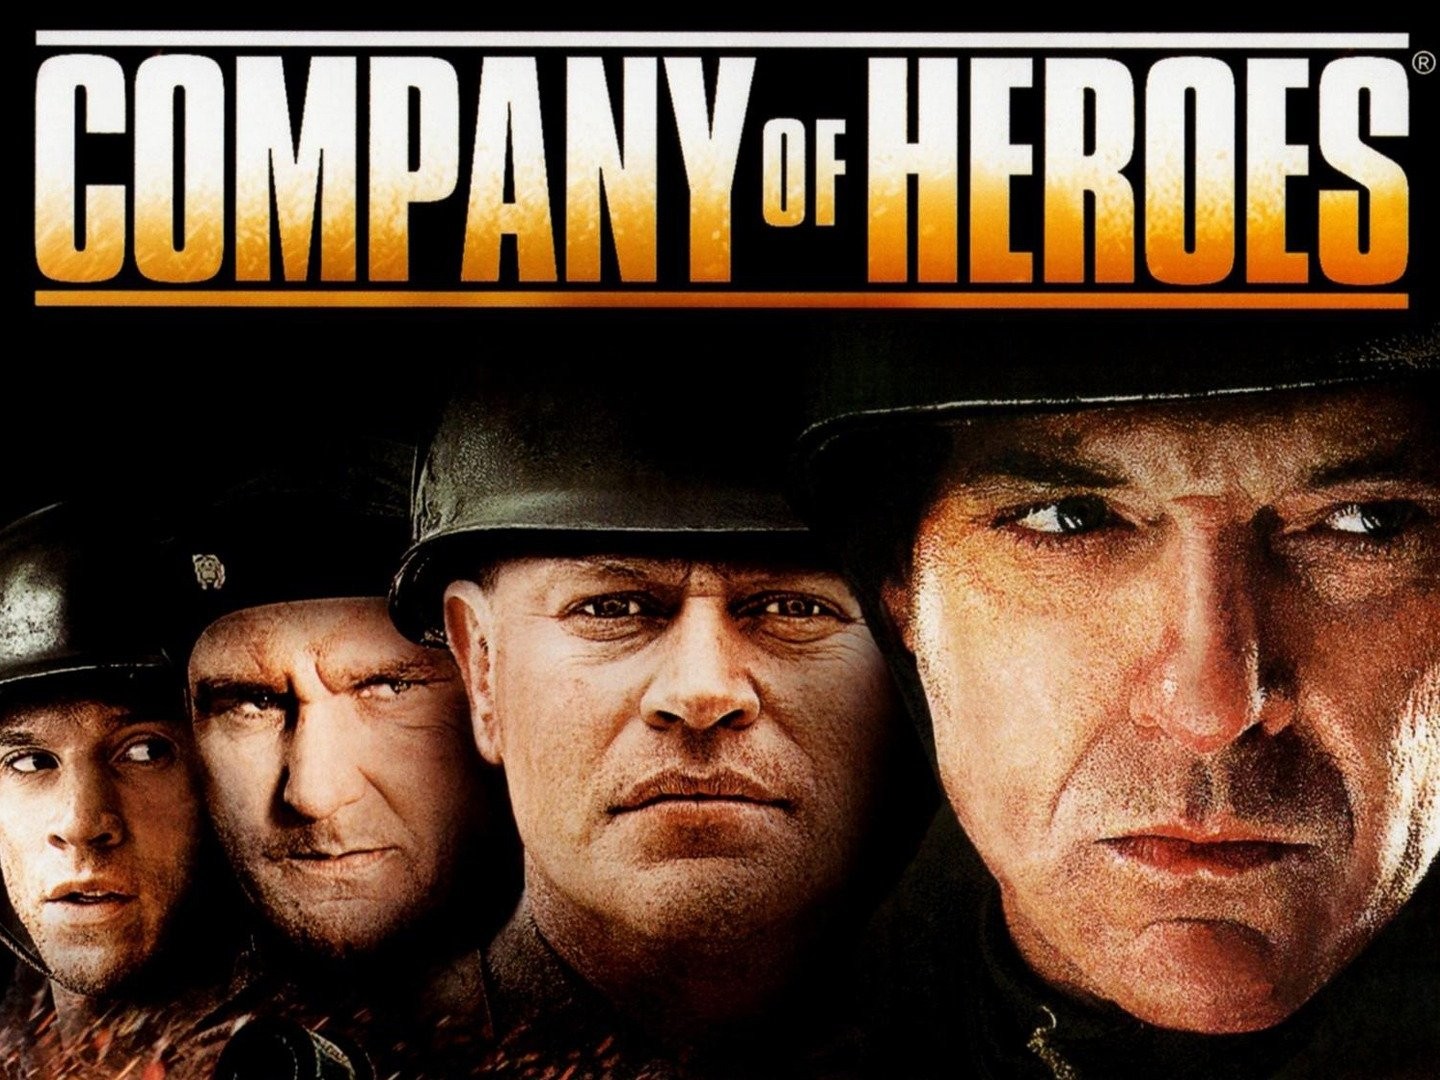 Headquarters World War II demo: The banner for the 2013 movie Company of Heroes, featuring the logo on top and the most awful montage on the B-list cast below it. Also, that movie has T-34s disguised as Panzer IVs, laffo.